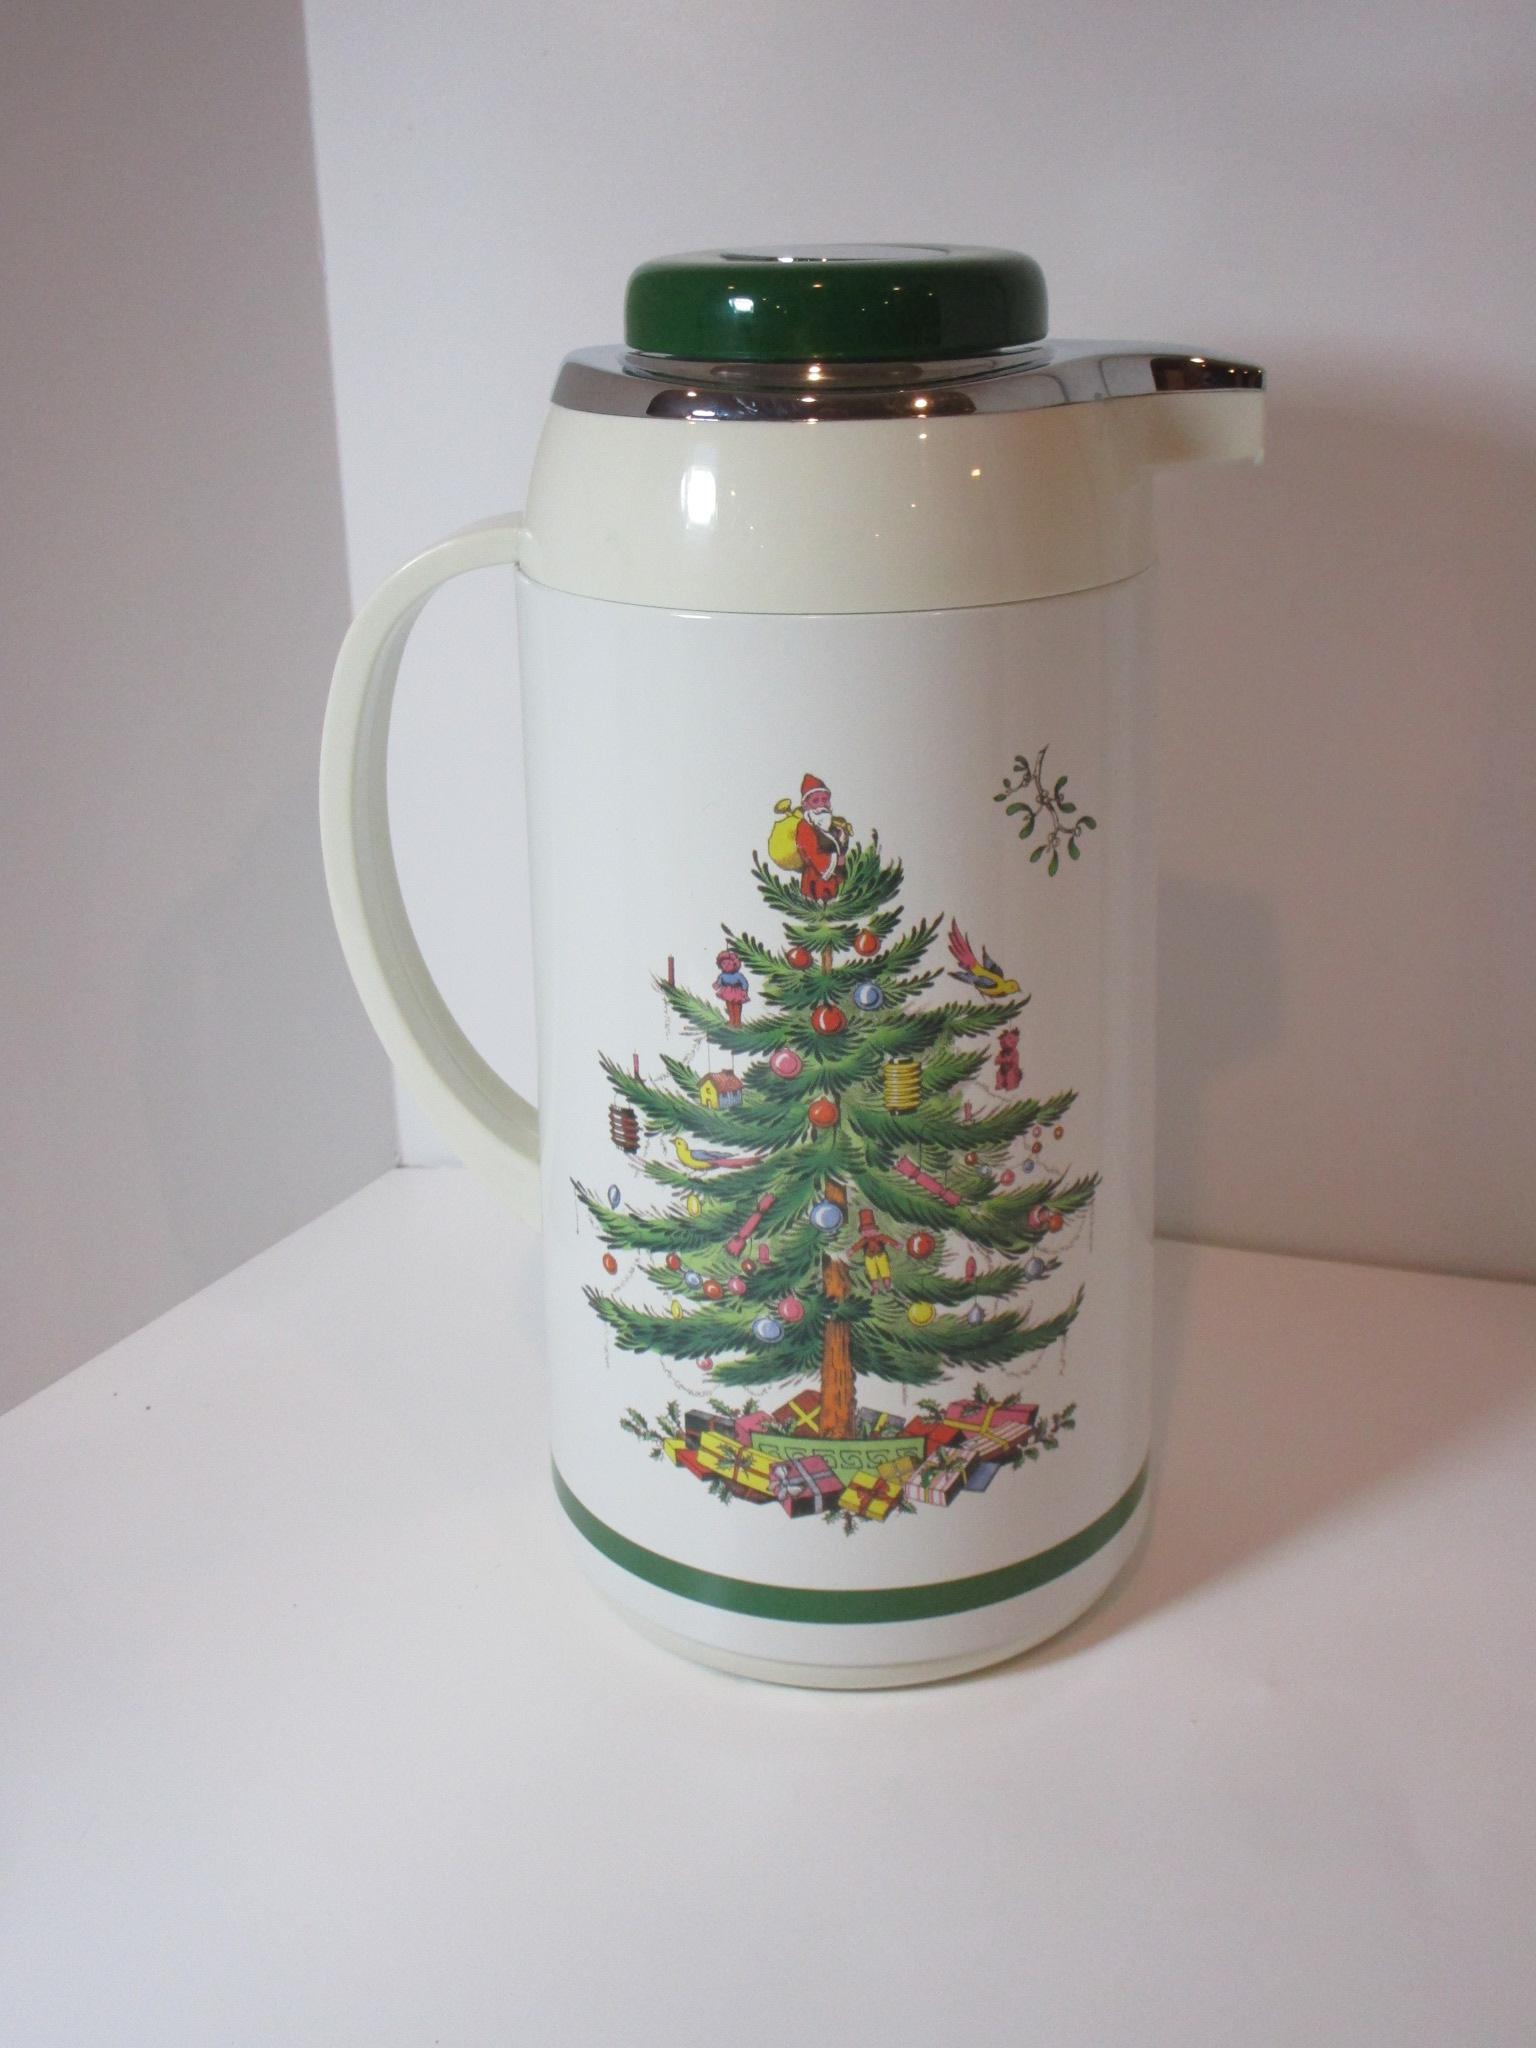 Spode "Christmas Tree" - Thermal Carafe (New in Box)